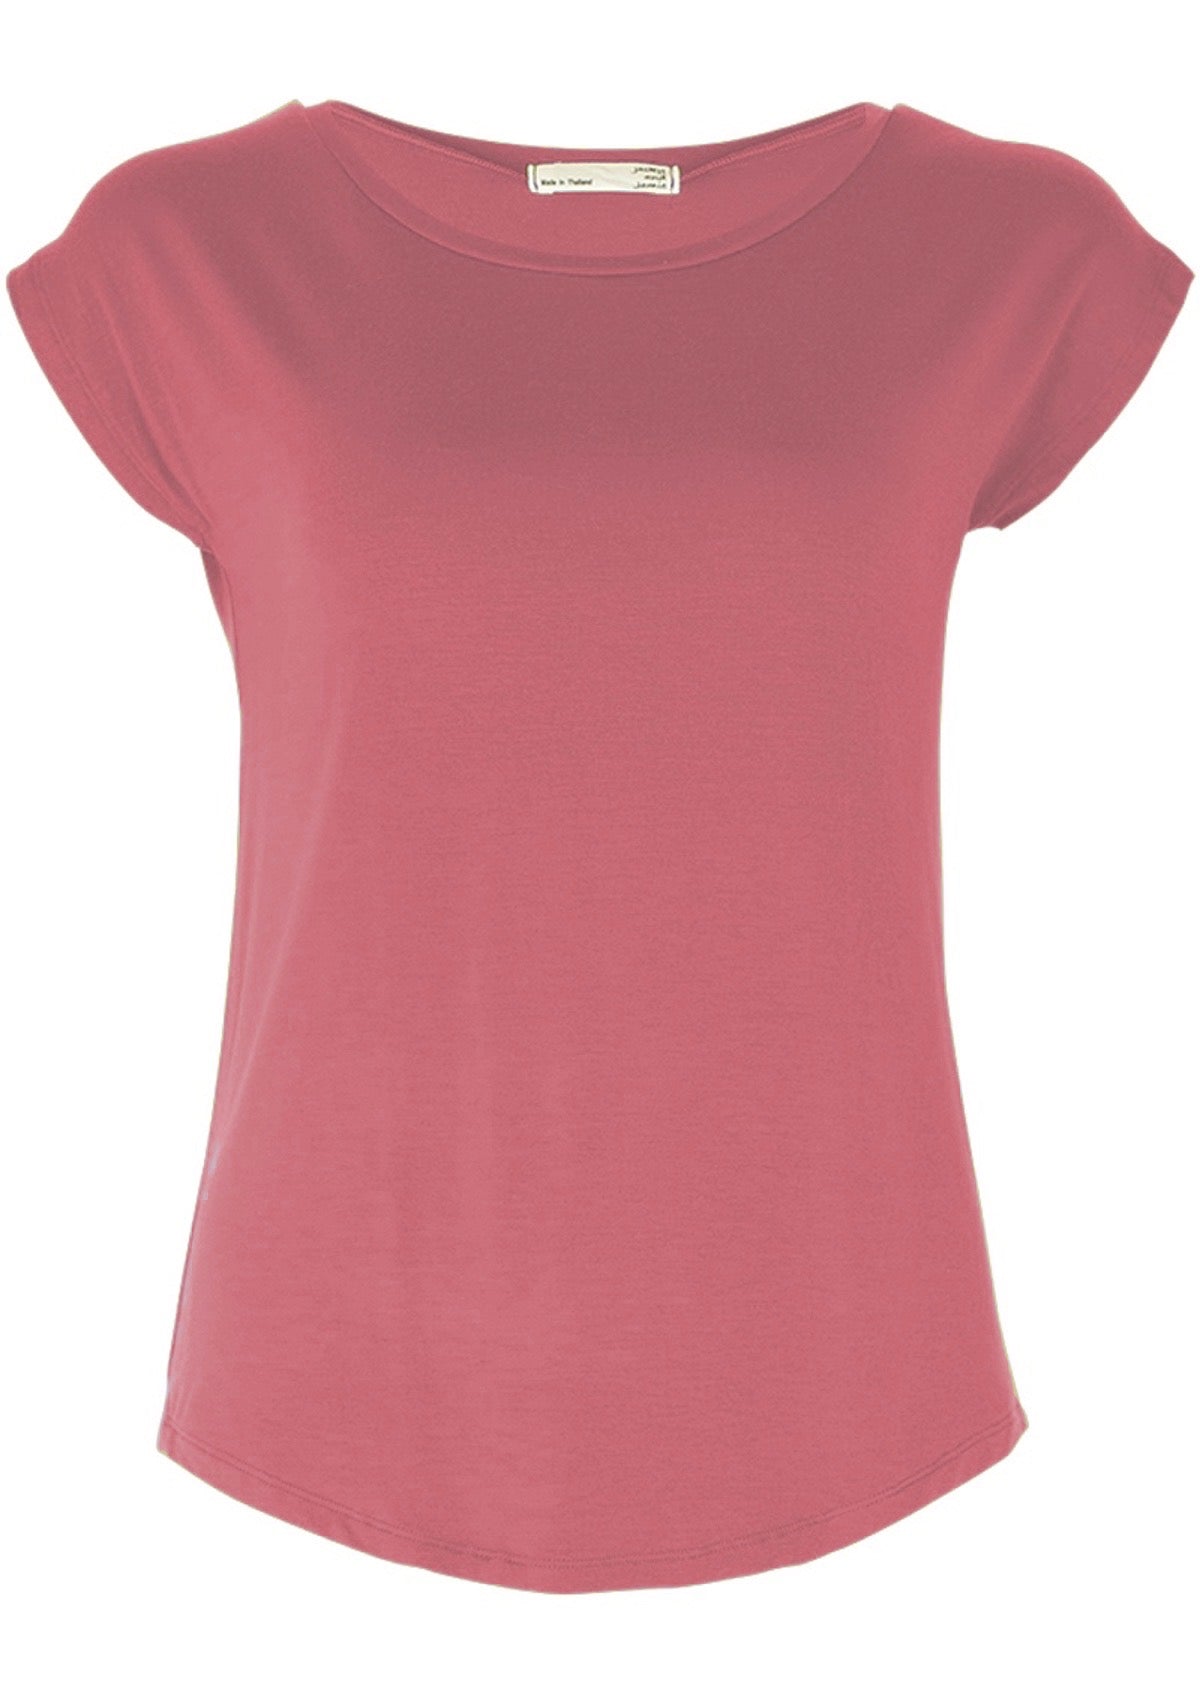 Front view women's pink rayon jersey t-shirt.